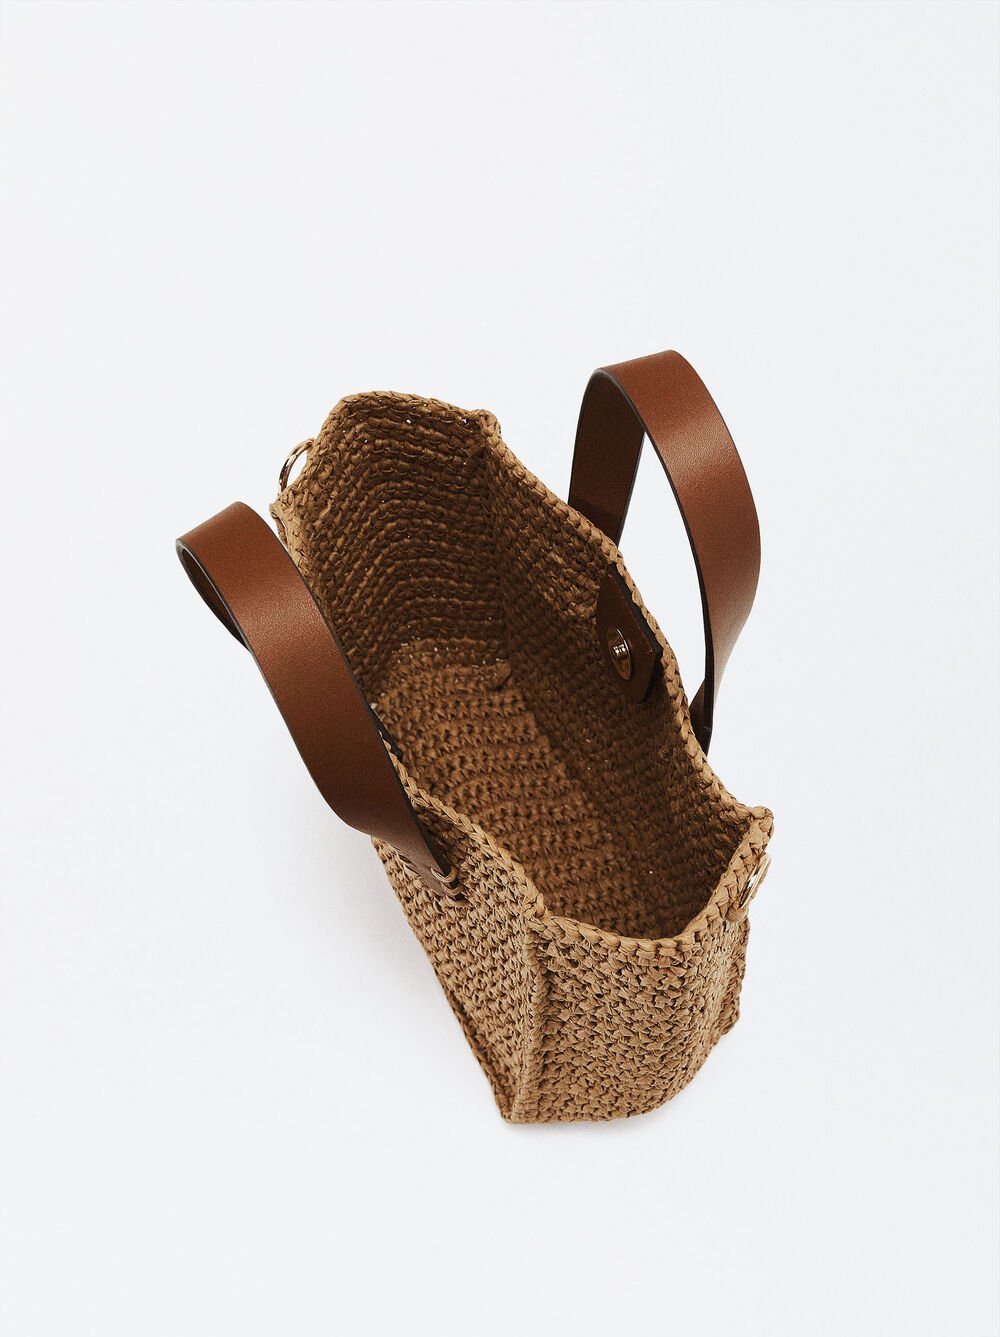 Straw-Effect Tote Bag